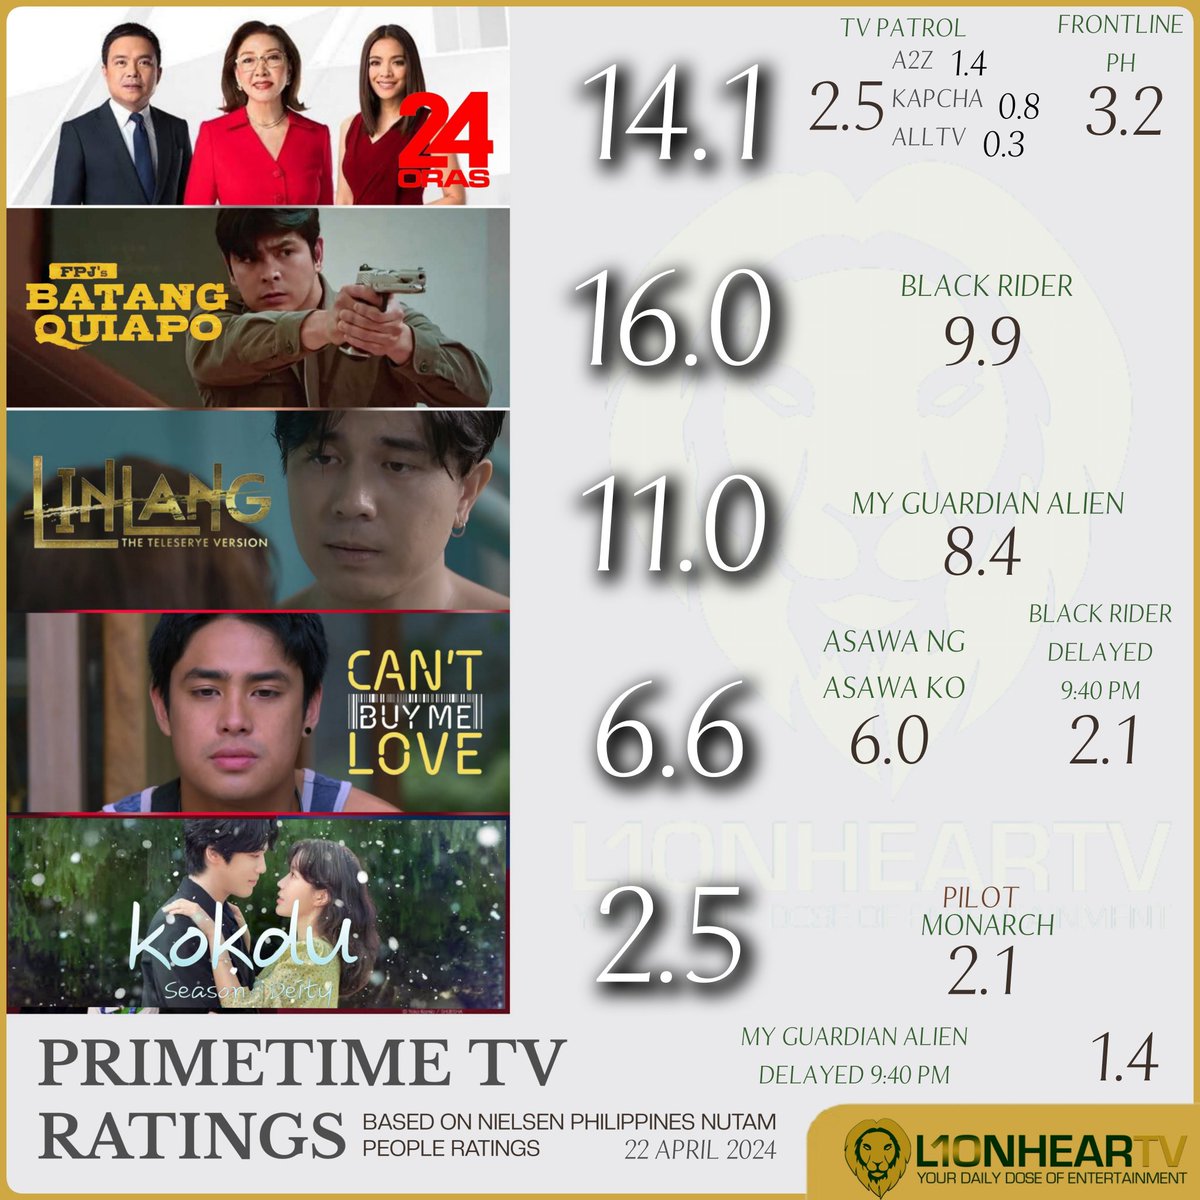 Here are the primetime ratings for Monday, April 22, accordingto Nielsen Philippines. #FPJsBatangQuiapo remains the overall number one TV show in the country, while #24Oras remains the most preferred newscast.

MORE RATINGS: lionheartv.net/ratings